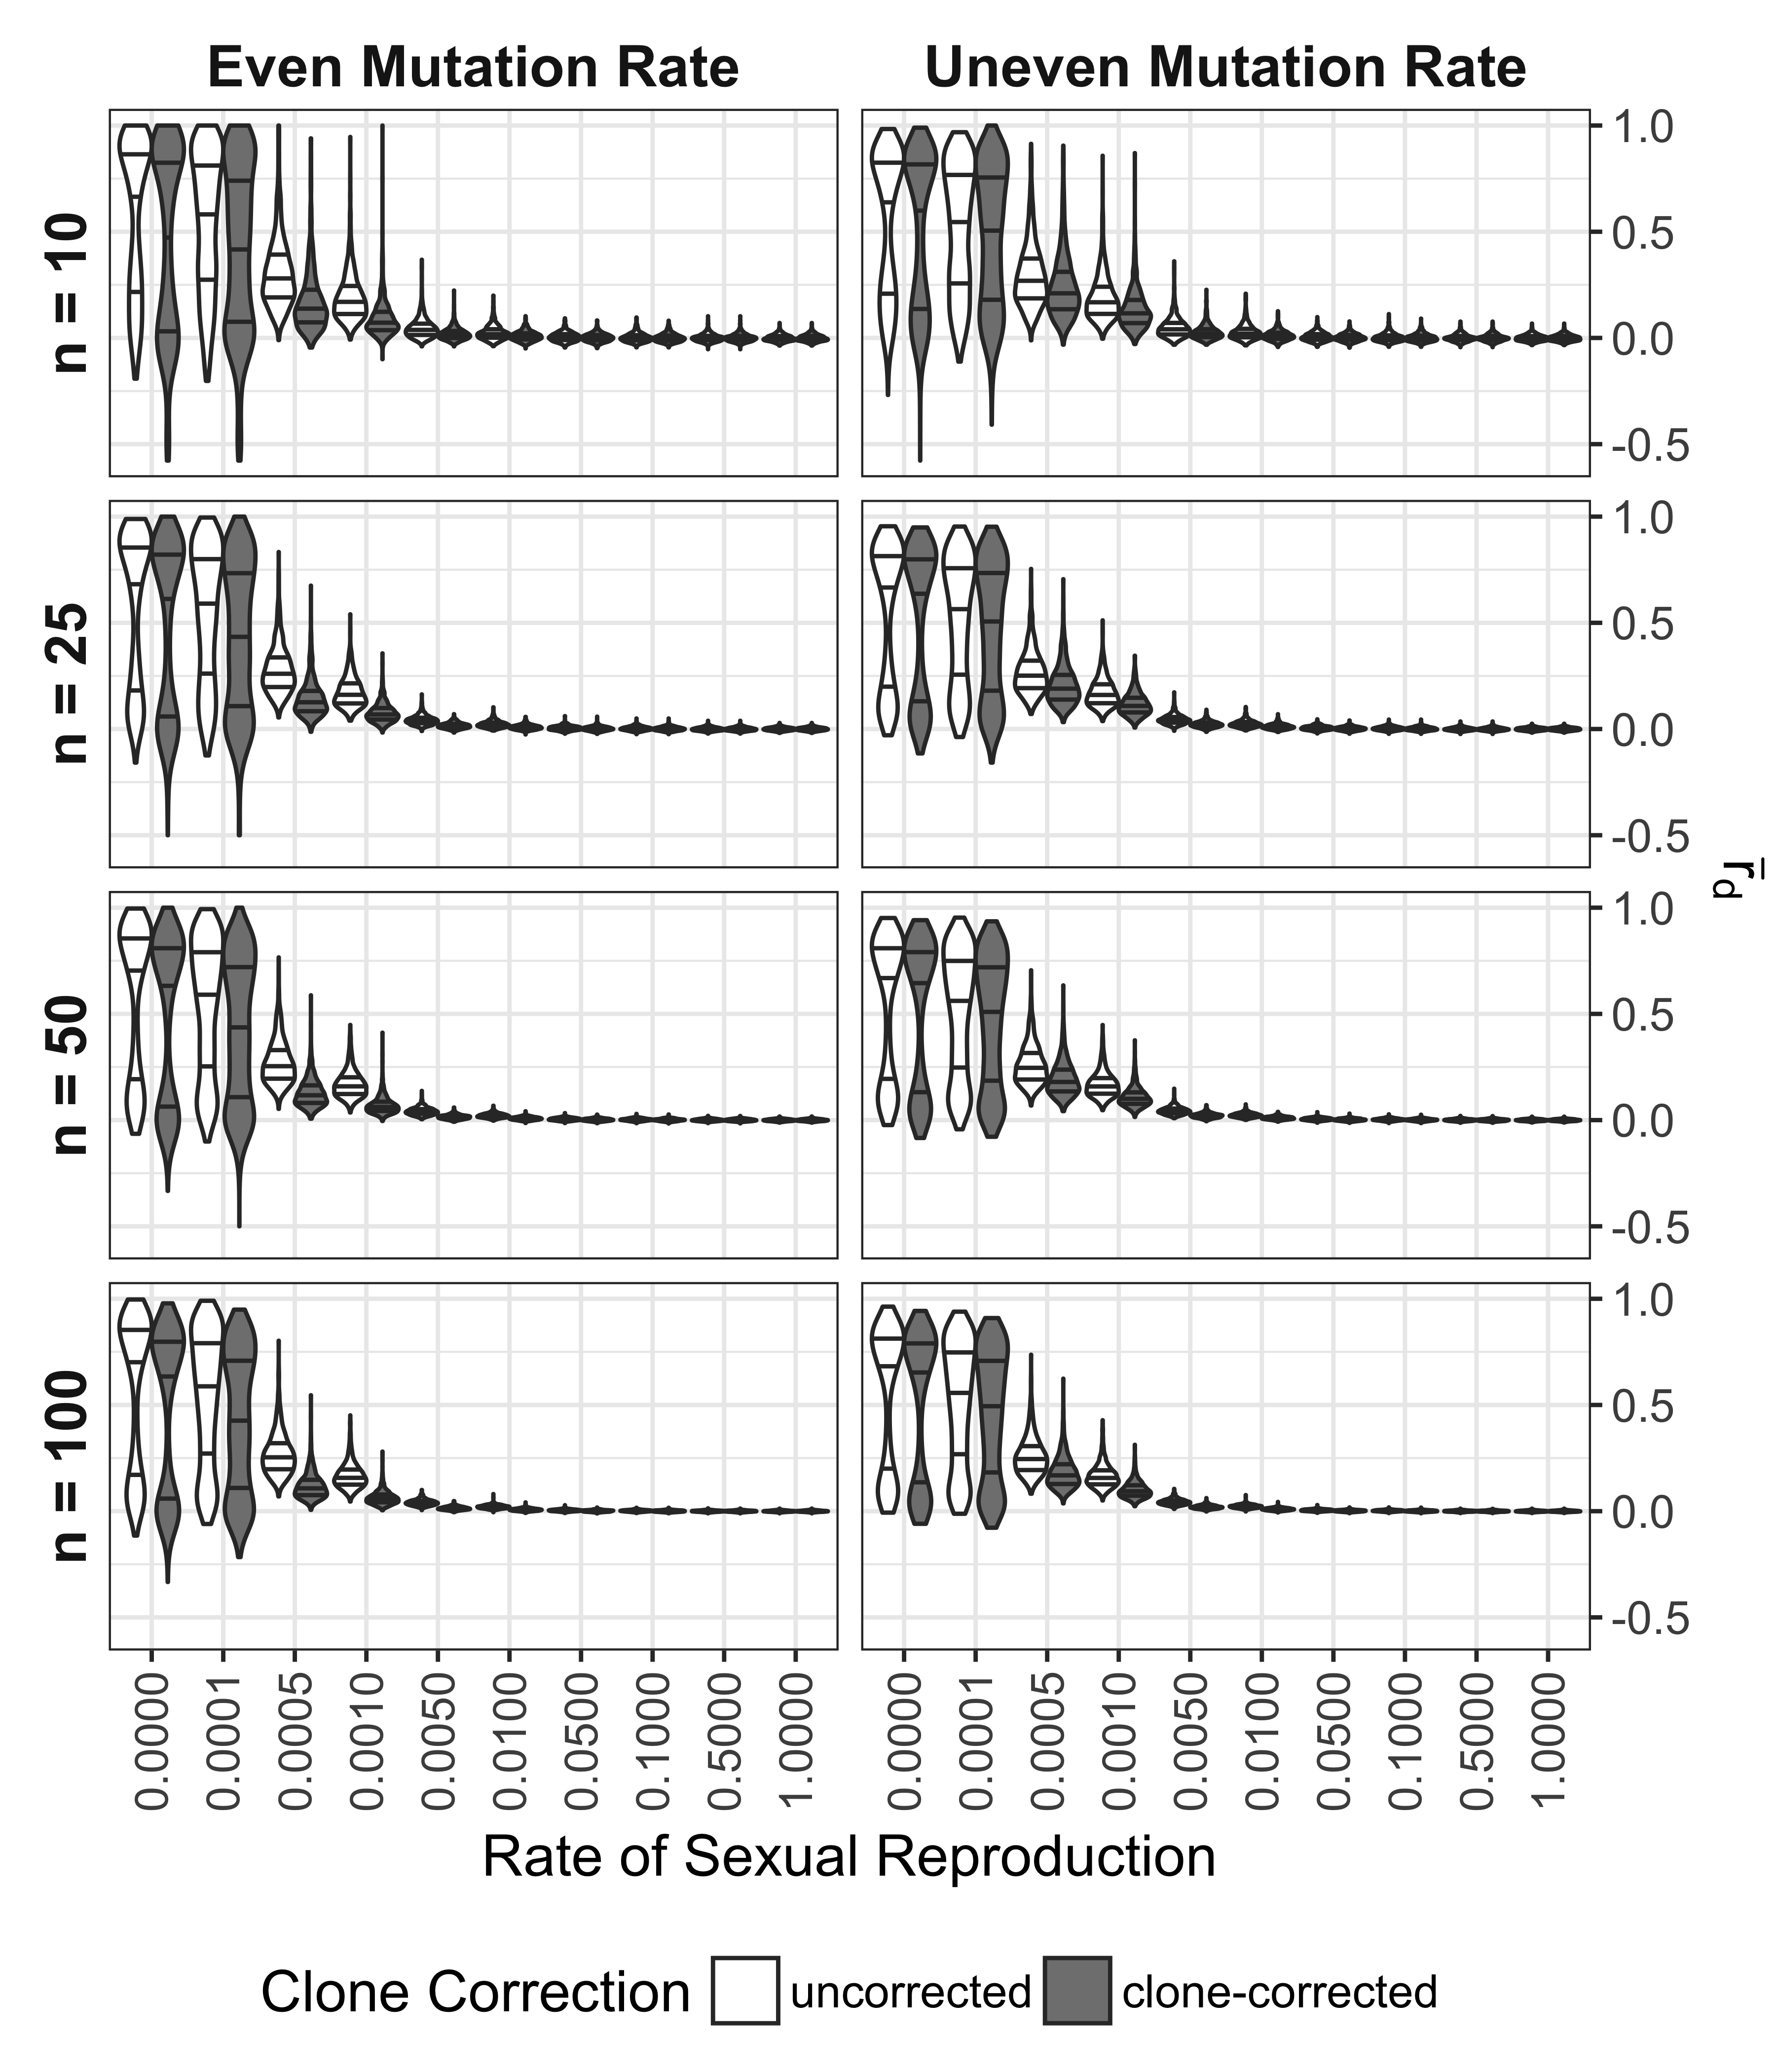 Effect of rate of sexual reproduction, sample size (n), mutation rate,
and clone-correction on $\bar{r}_d$ for microsatellite data. Violin
plots represent data sets simulated with even and uneven mutation rates
over 20 and 21 loci, respectively (columns) and sub-sampled in four
different population sizes (rows). Color indicates whether or not the
calculations were performed on whole or clone-corrected data sets. Each
violin plot contains 1000 unique data sets. Black lines in violins mark
the 25, 50, and 75th percentile.